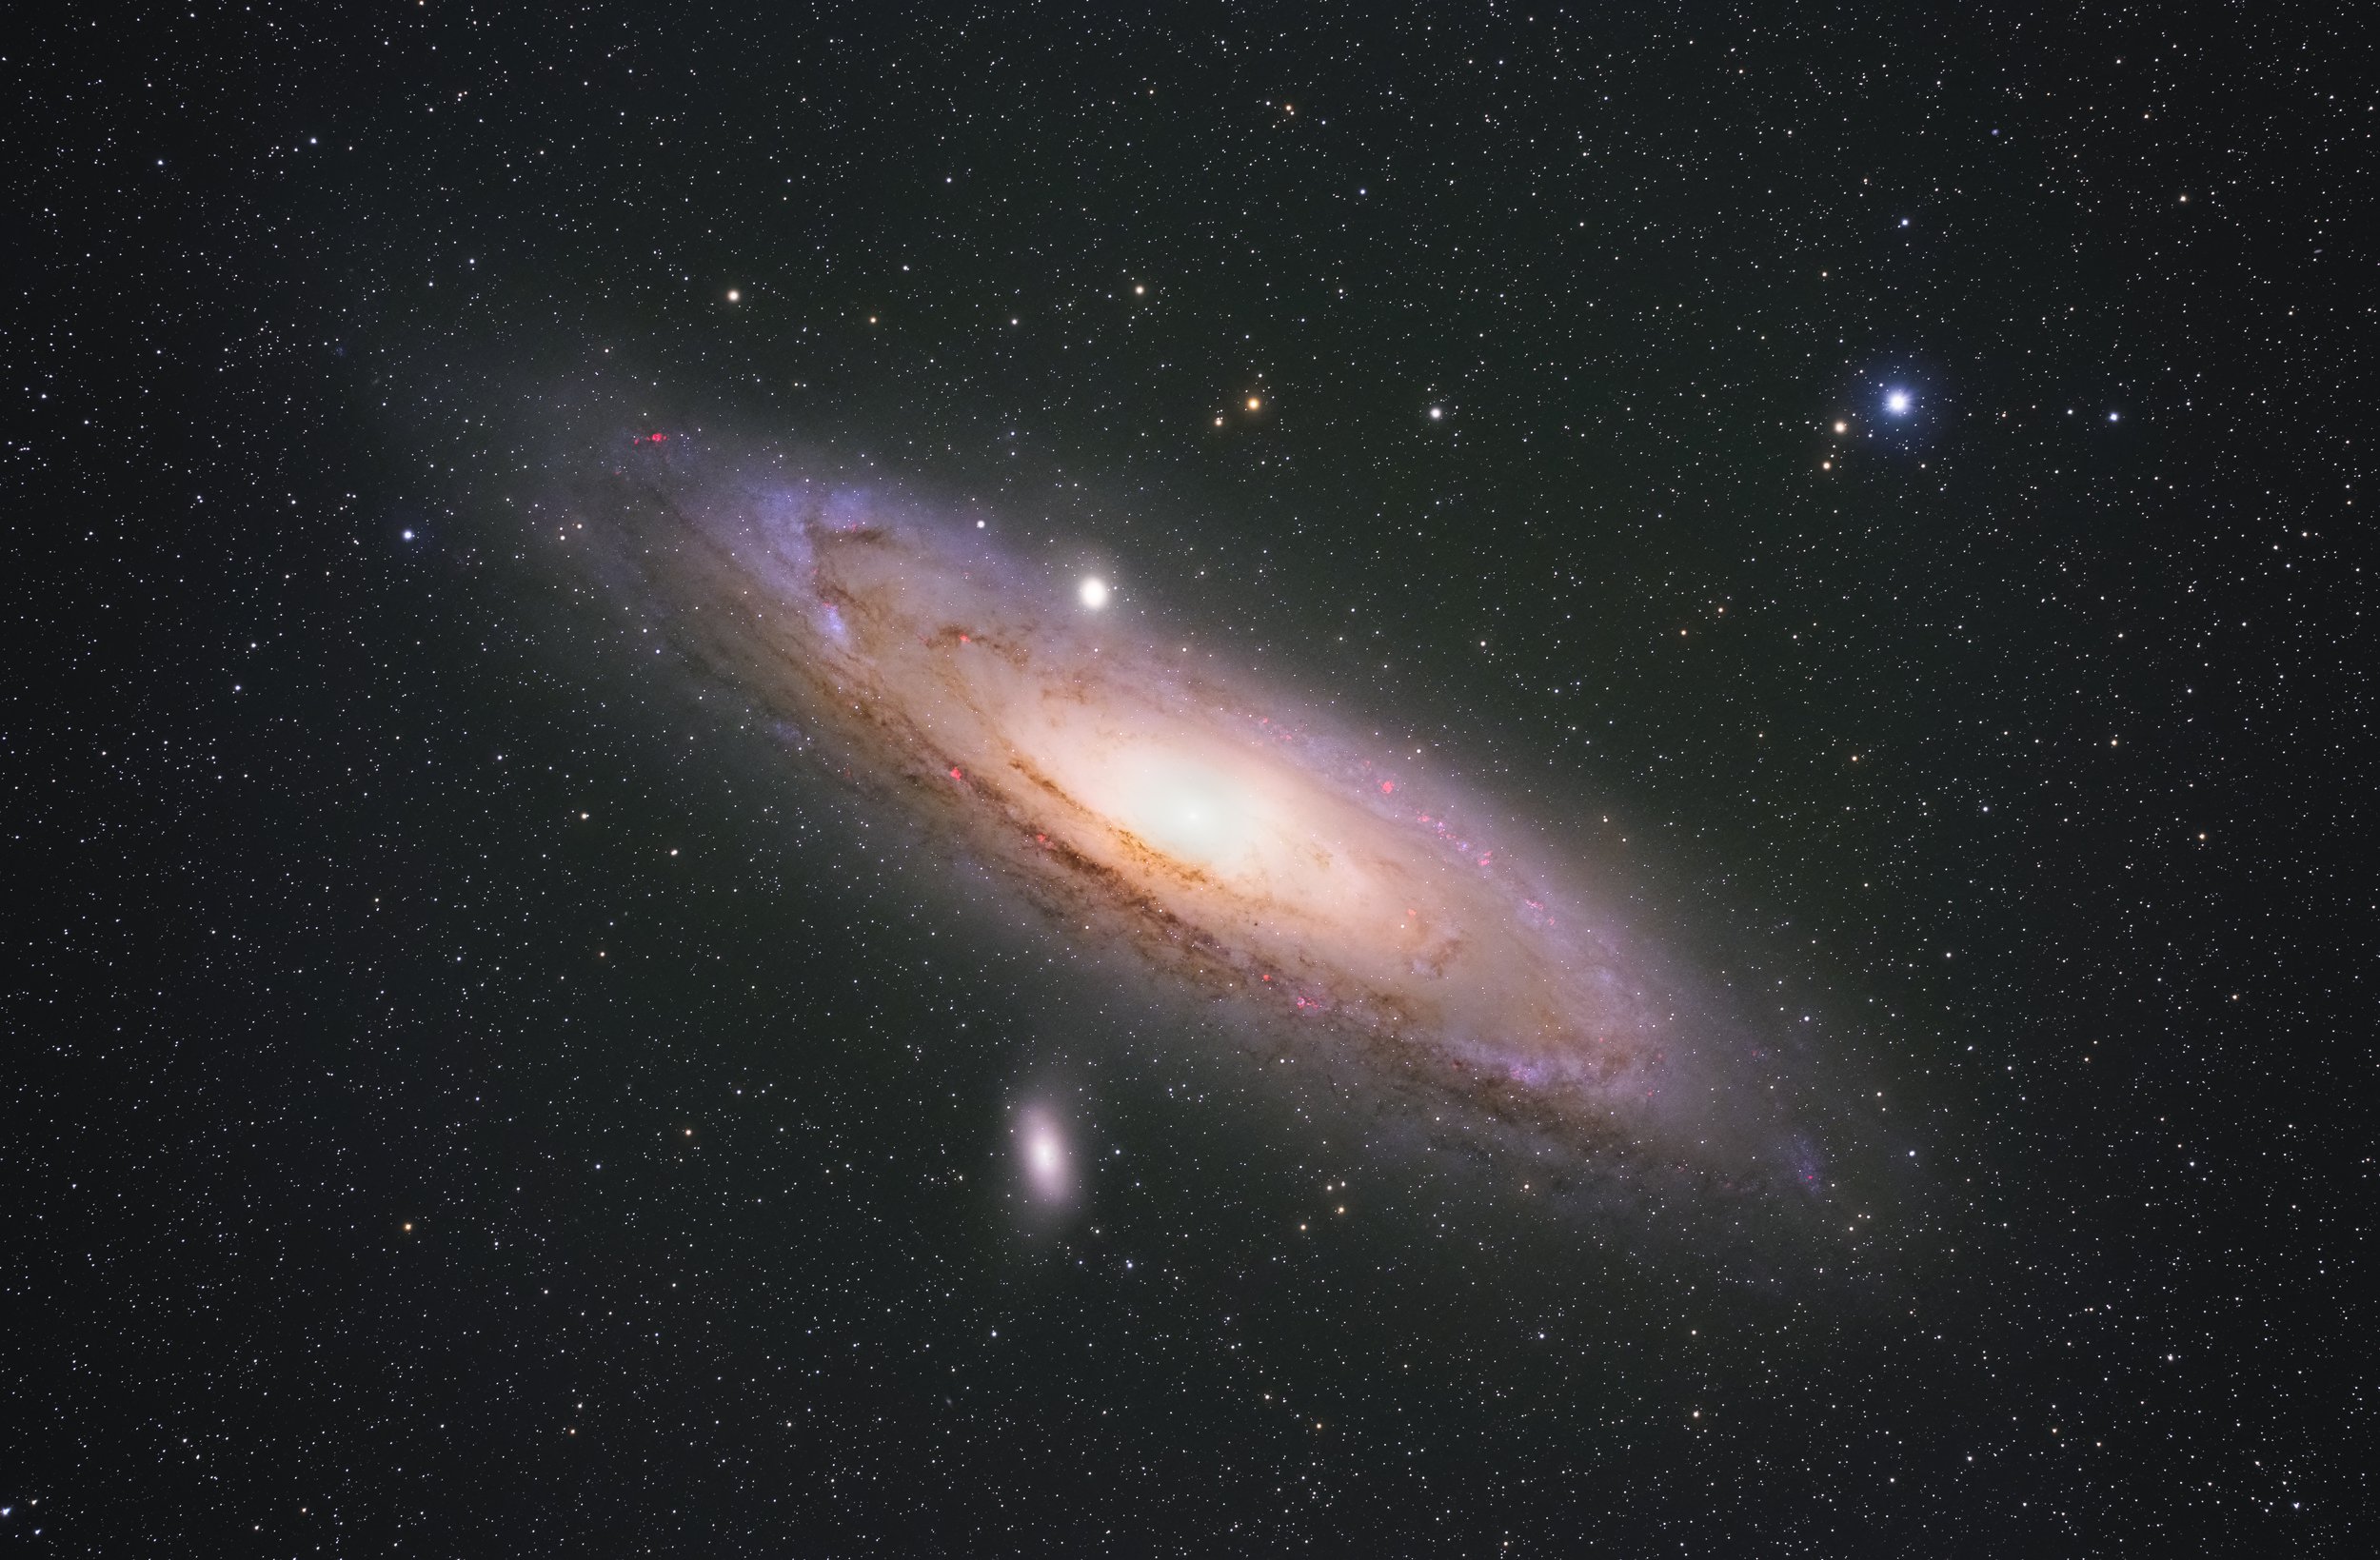 Andromeda Galaxy from Almost Heaven Star Party 2022